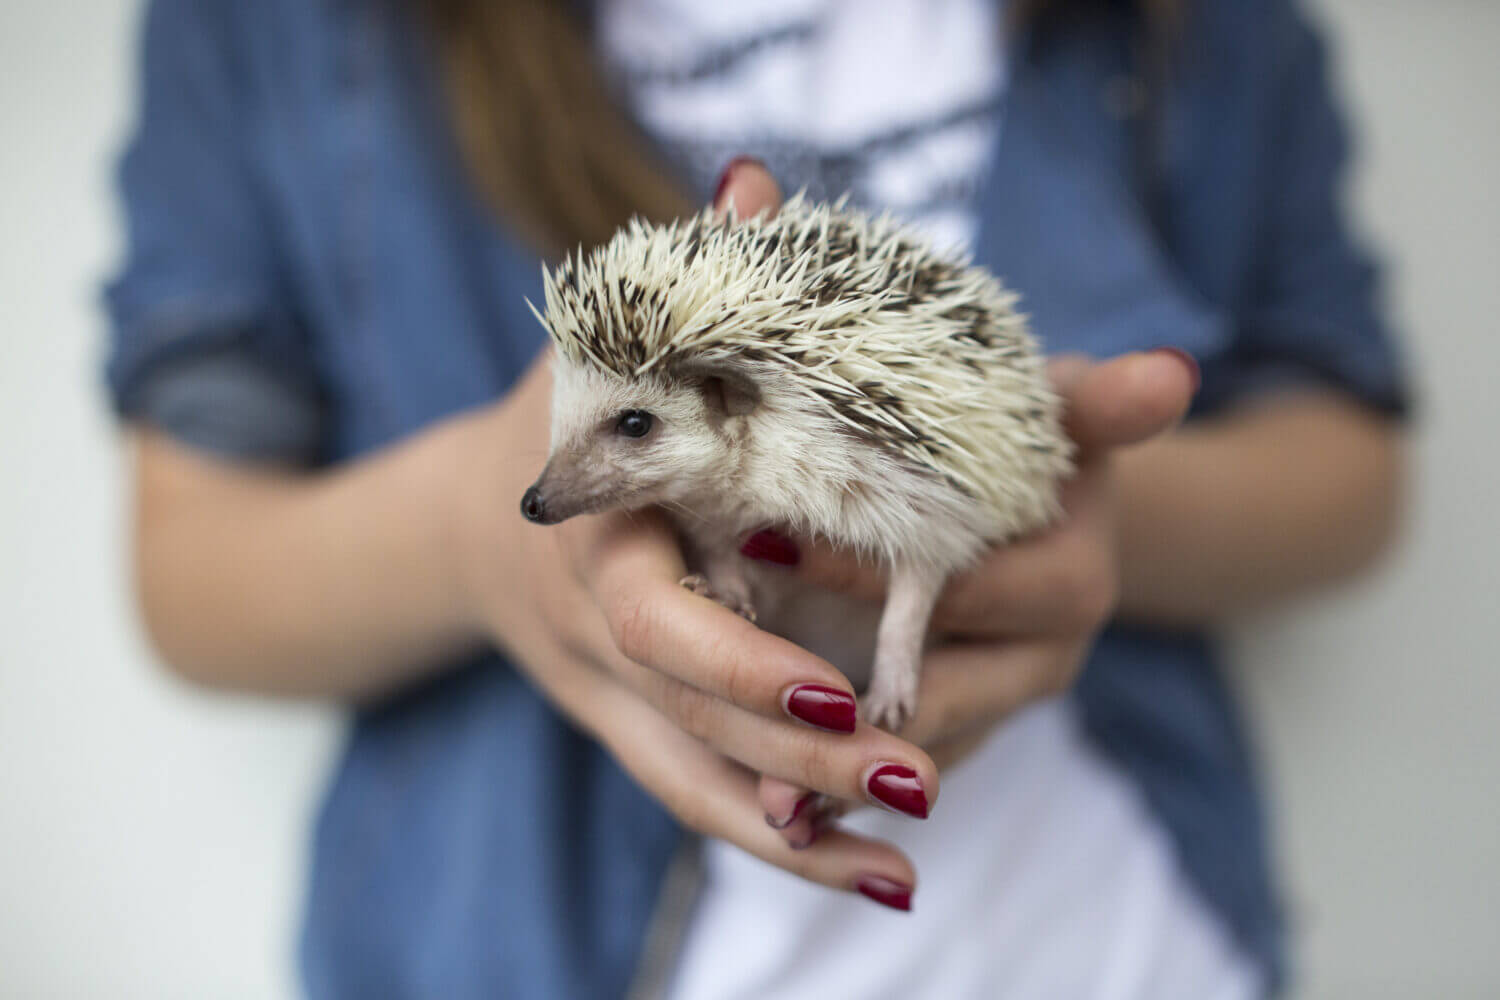 Woman hands holding white african hedgehog